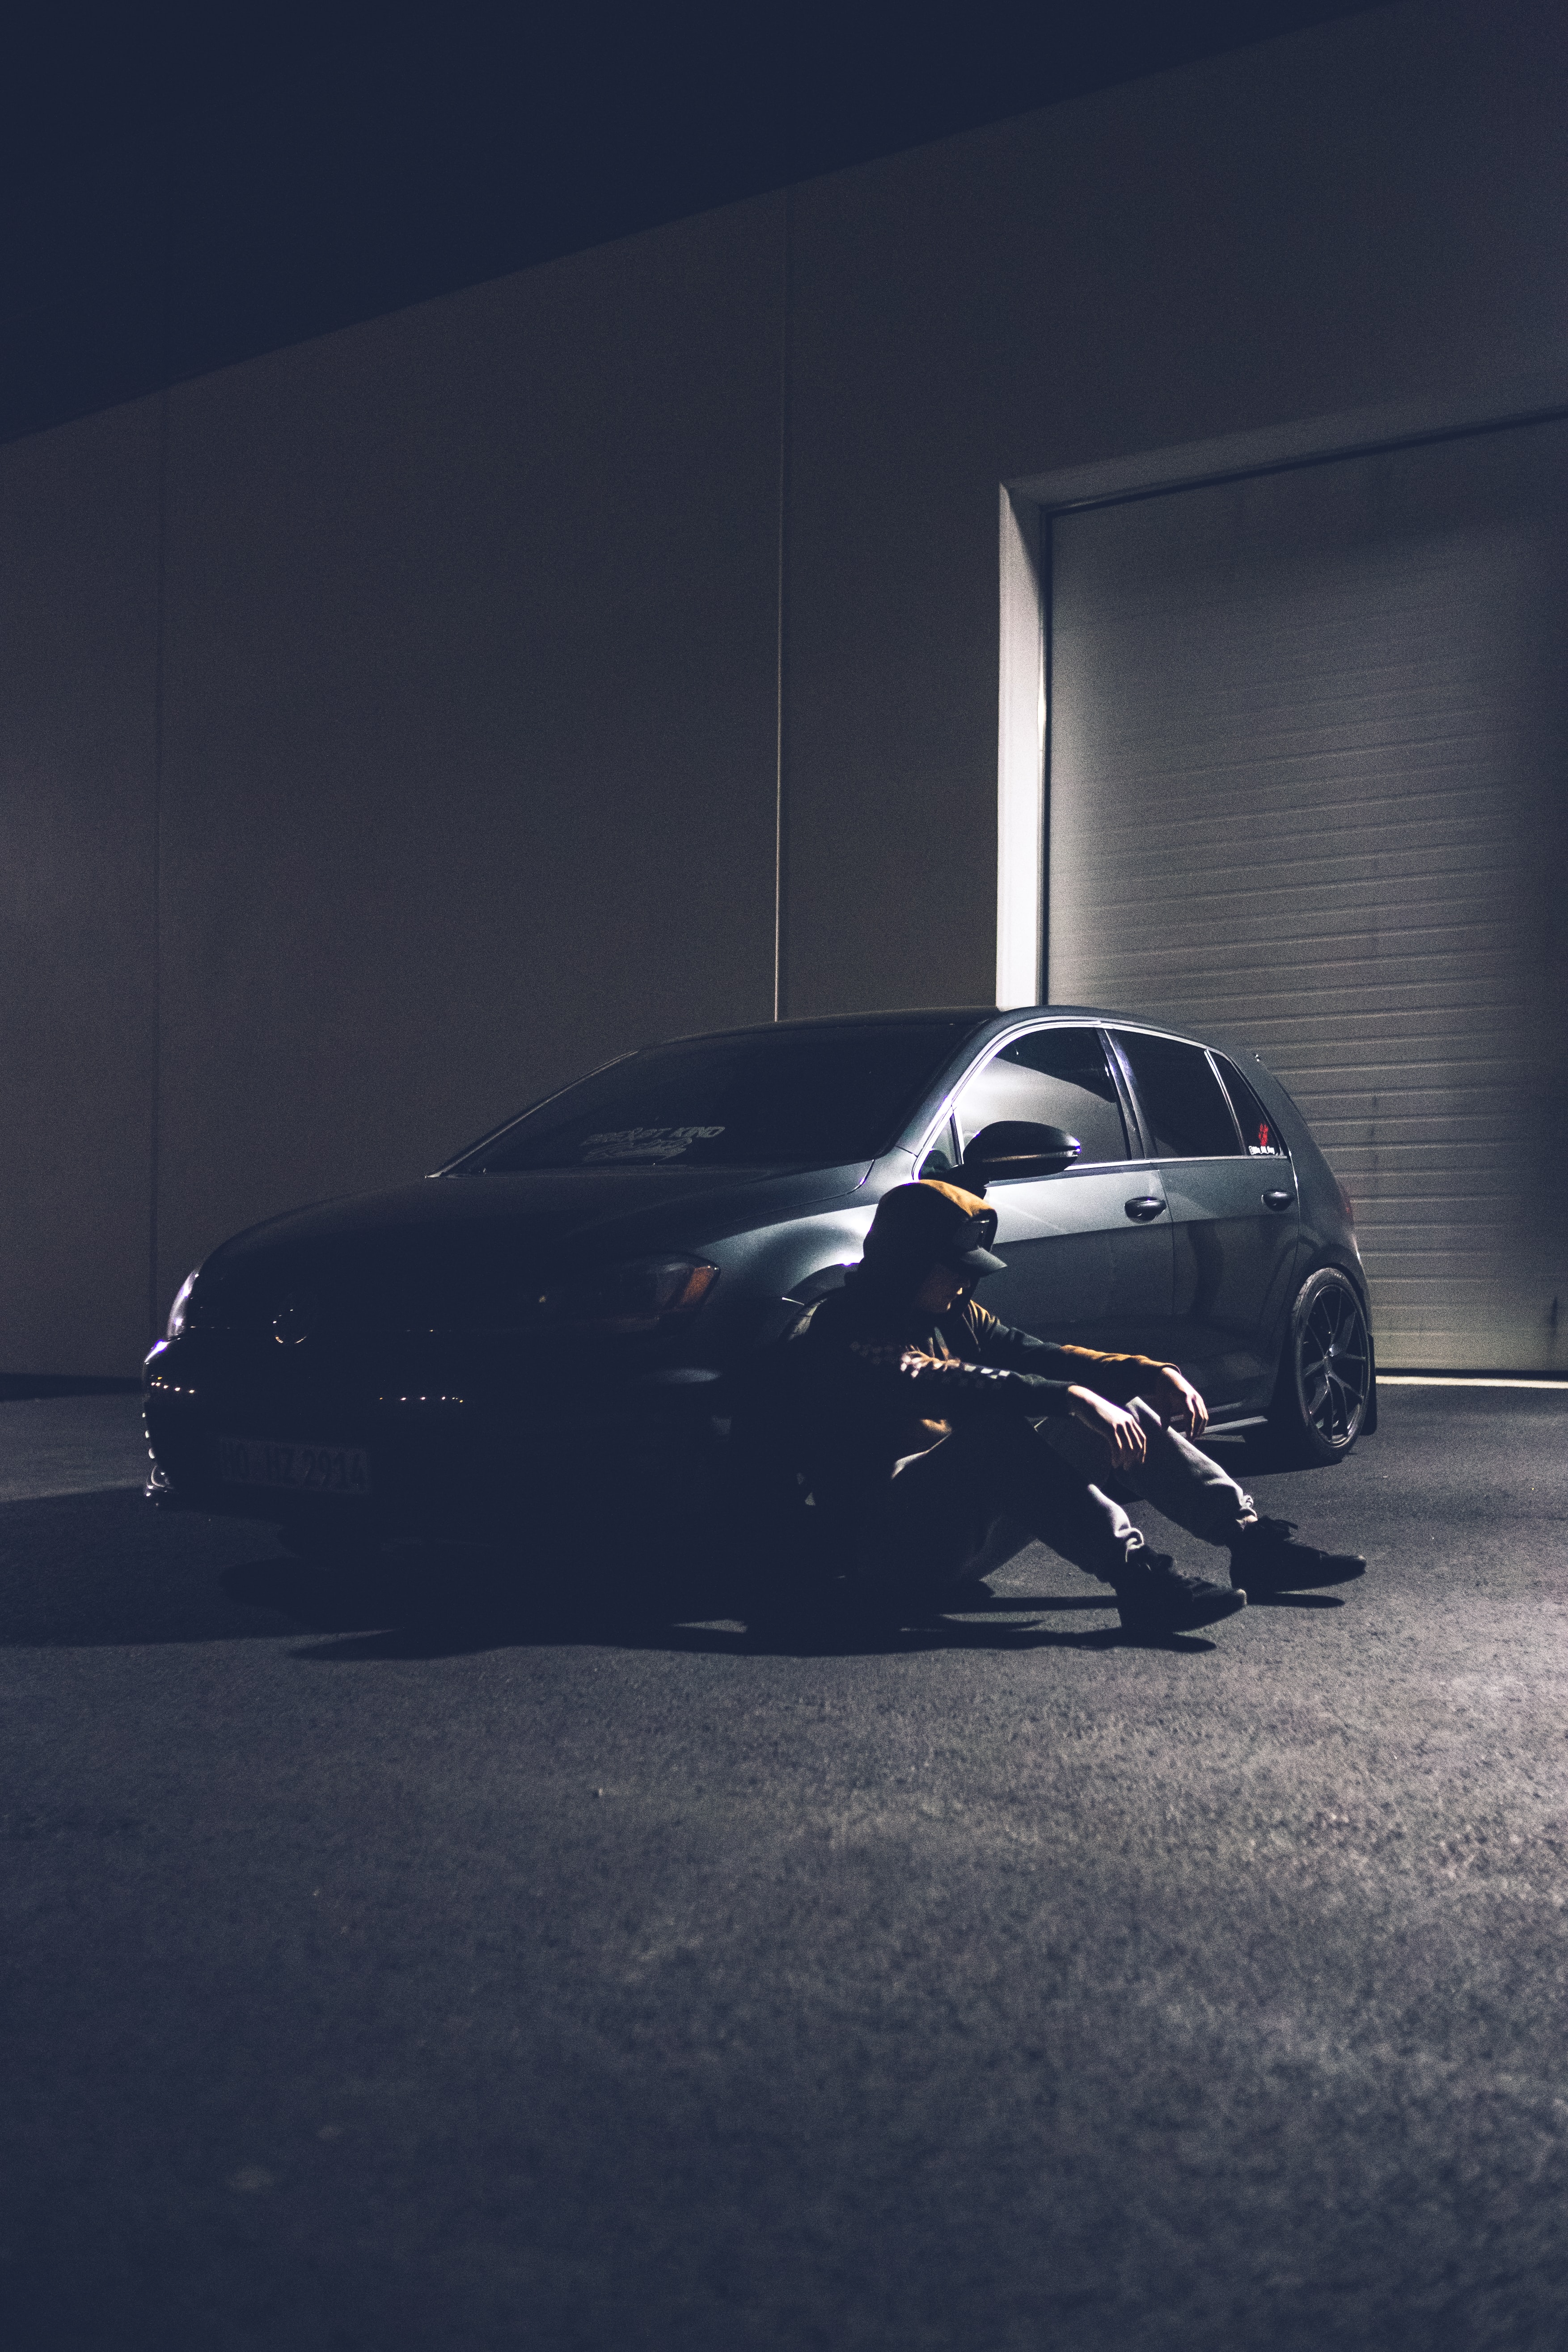 loneliness, alone, sadness, cars, car, machine, cap, lonely, sorrow Full HD